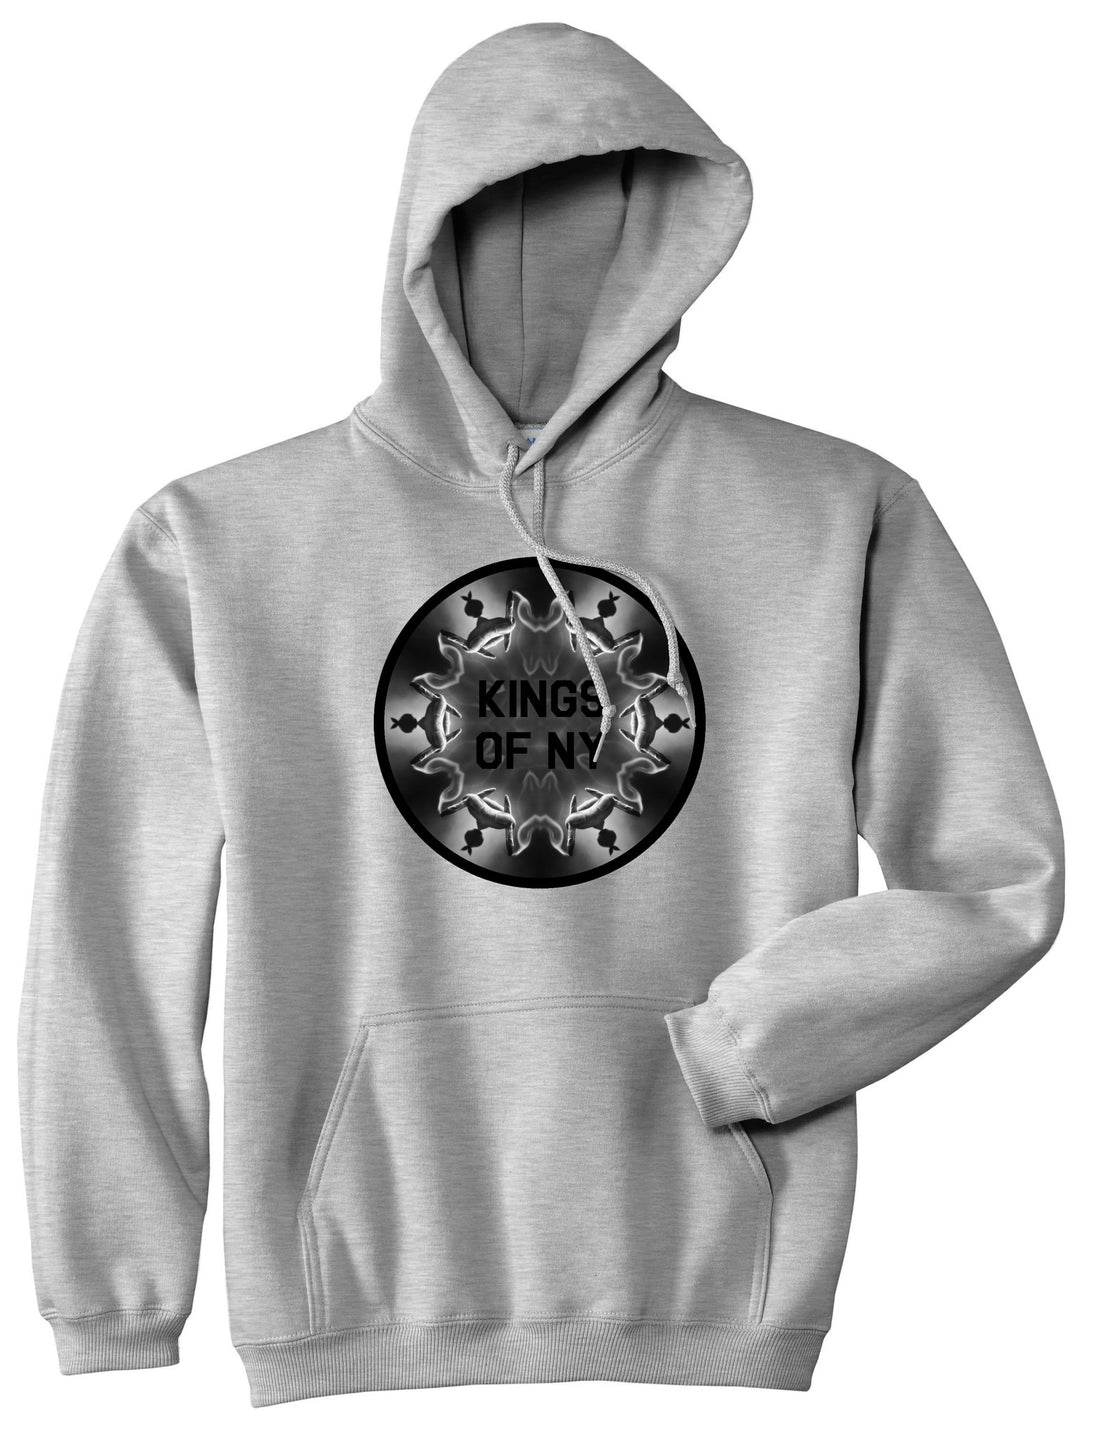 Pass That Blunt Pullover Hoodie in Grey By Kings Of NY